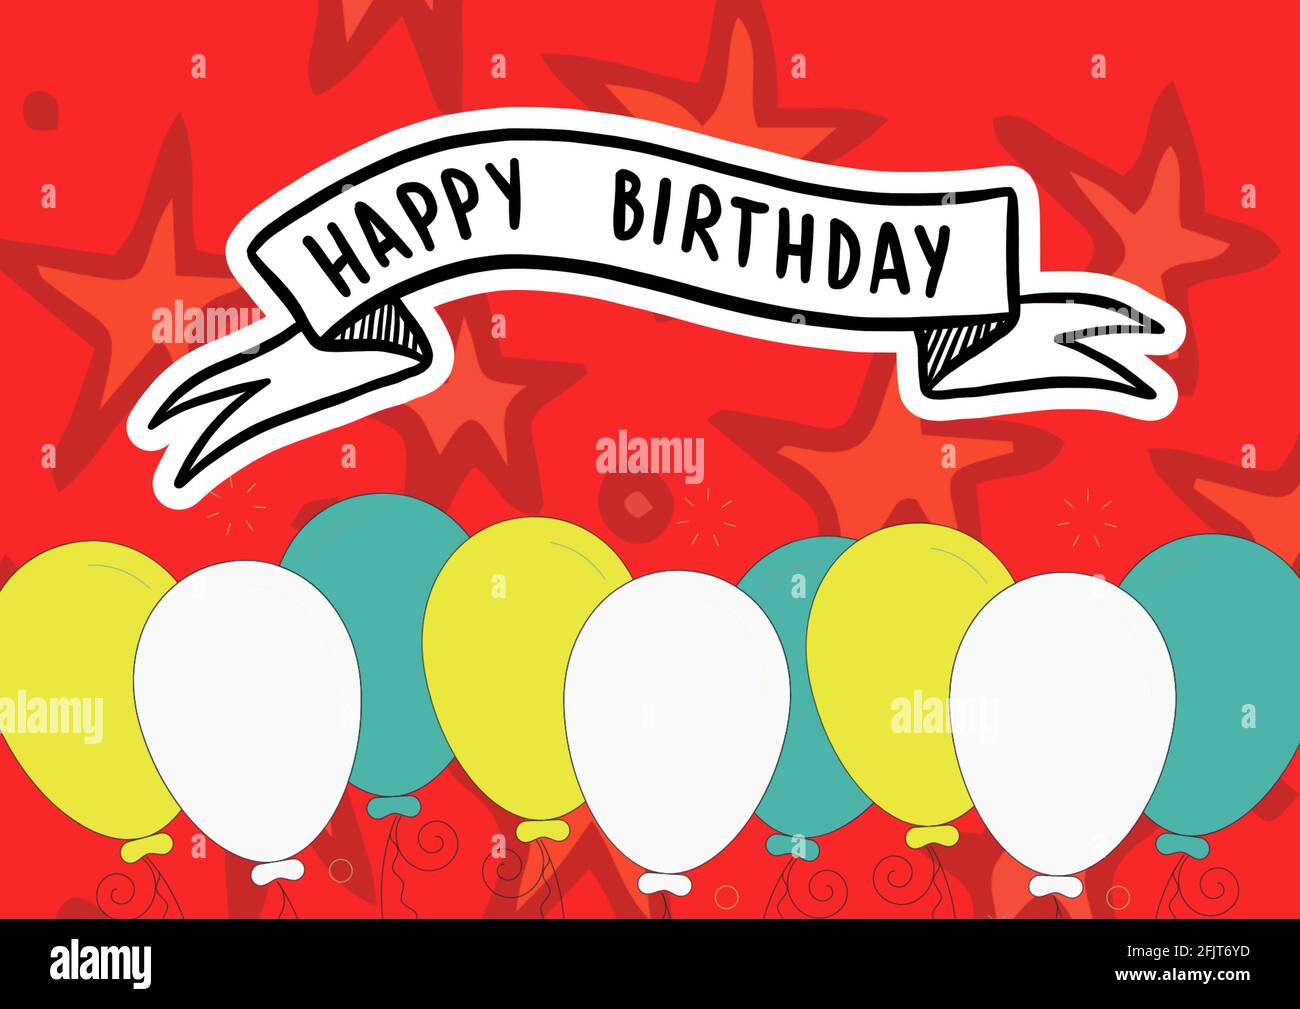 Happy birthday text over ribbon banner against colorful balloons and stars on red background Stock Photo